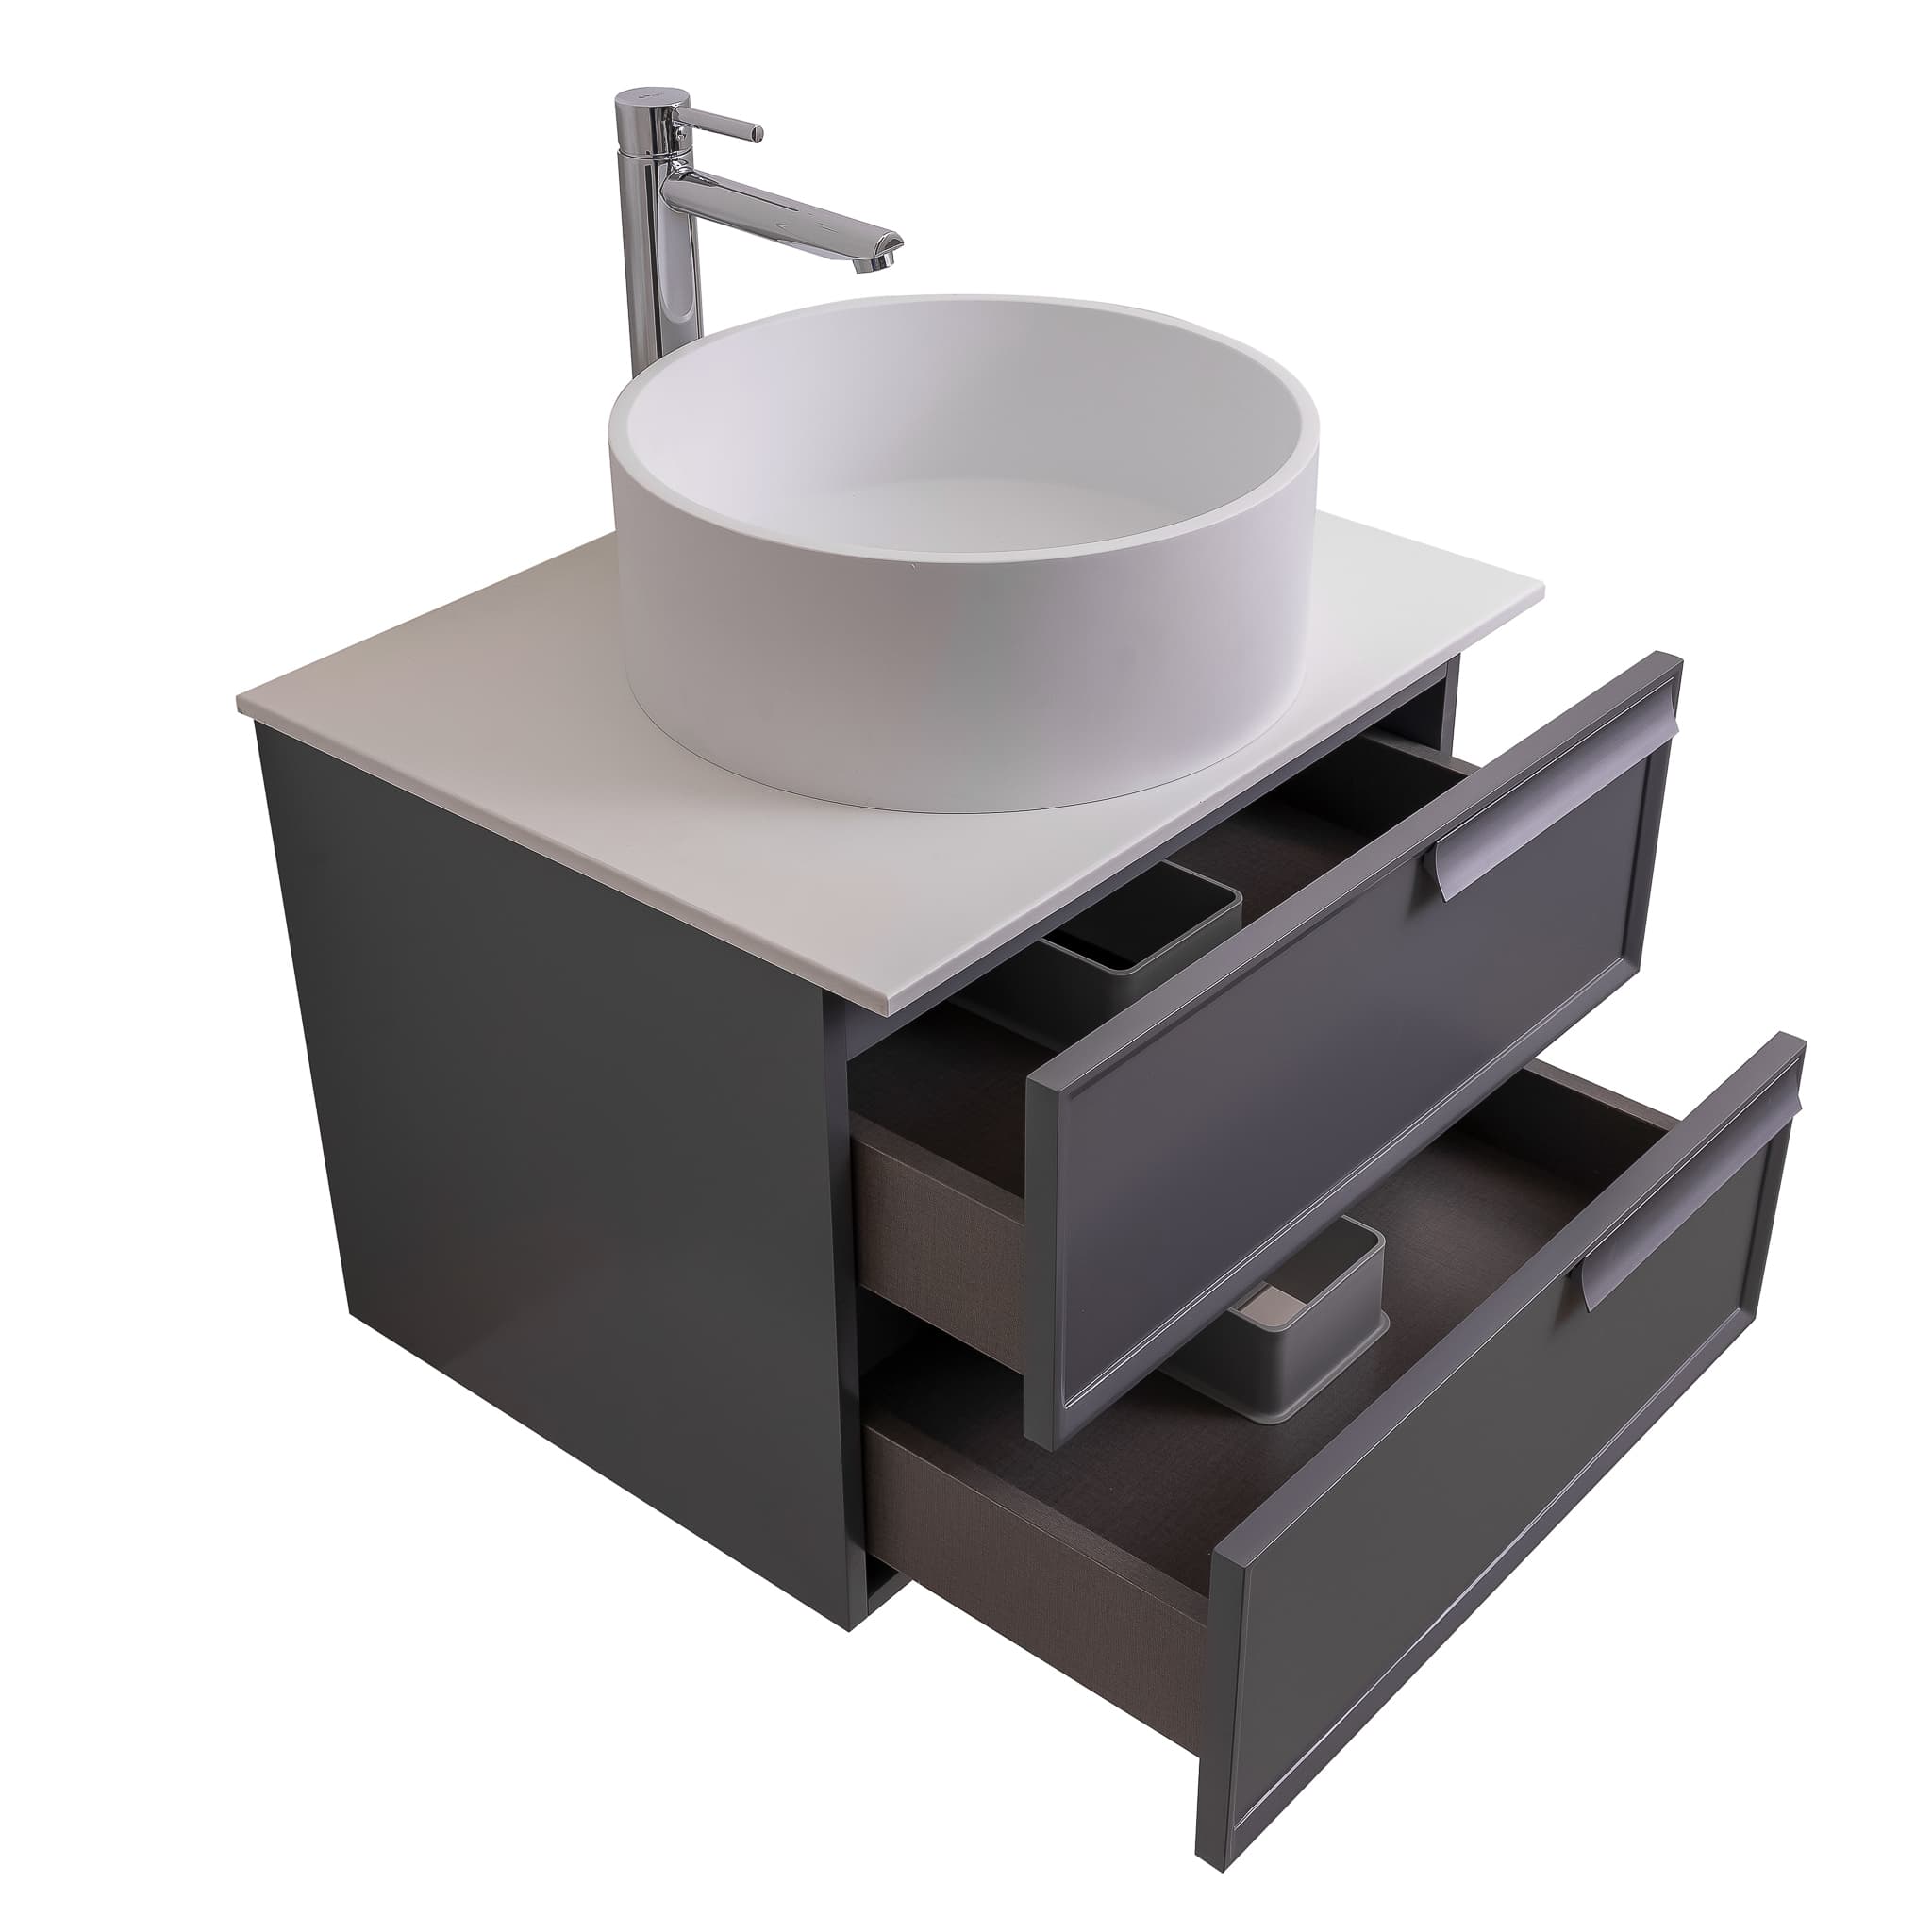 Garda 23.5 Matte Grey Cabinet, Solid Surface Flat White Counter and Round Solid Surface White Basin 1386, Wall Mounted Modern Vanity Set